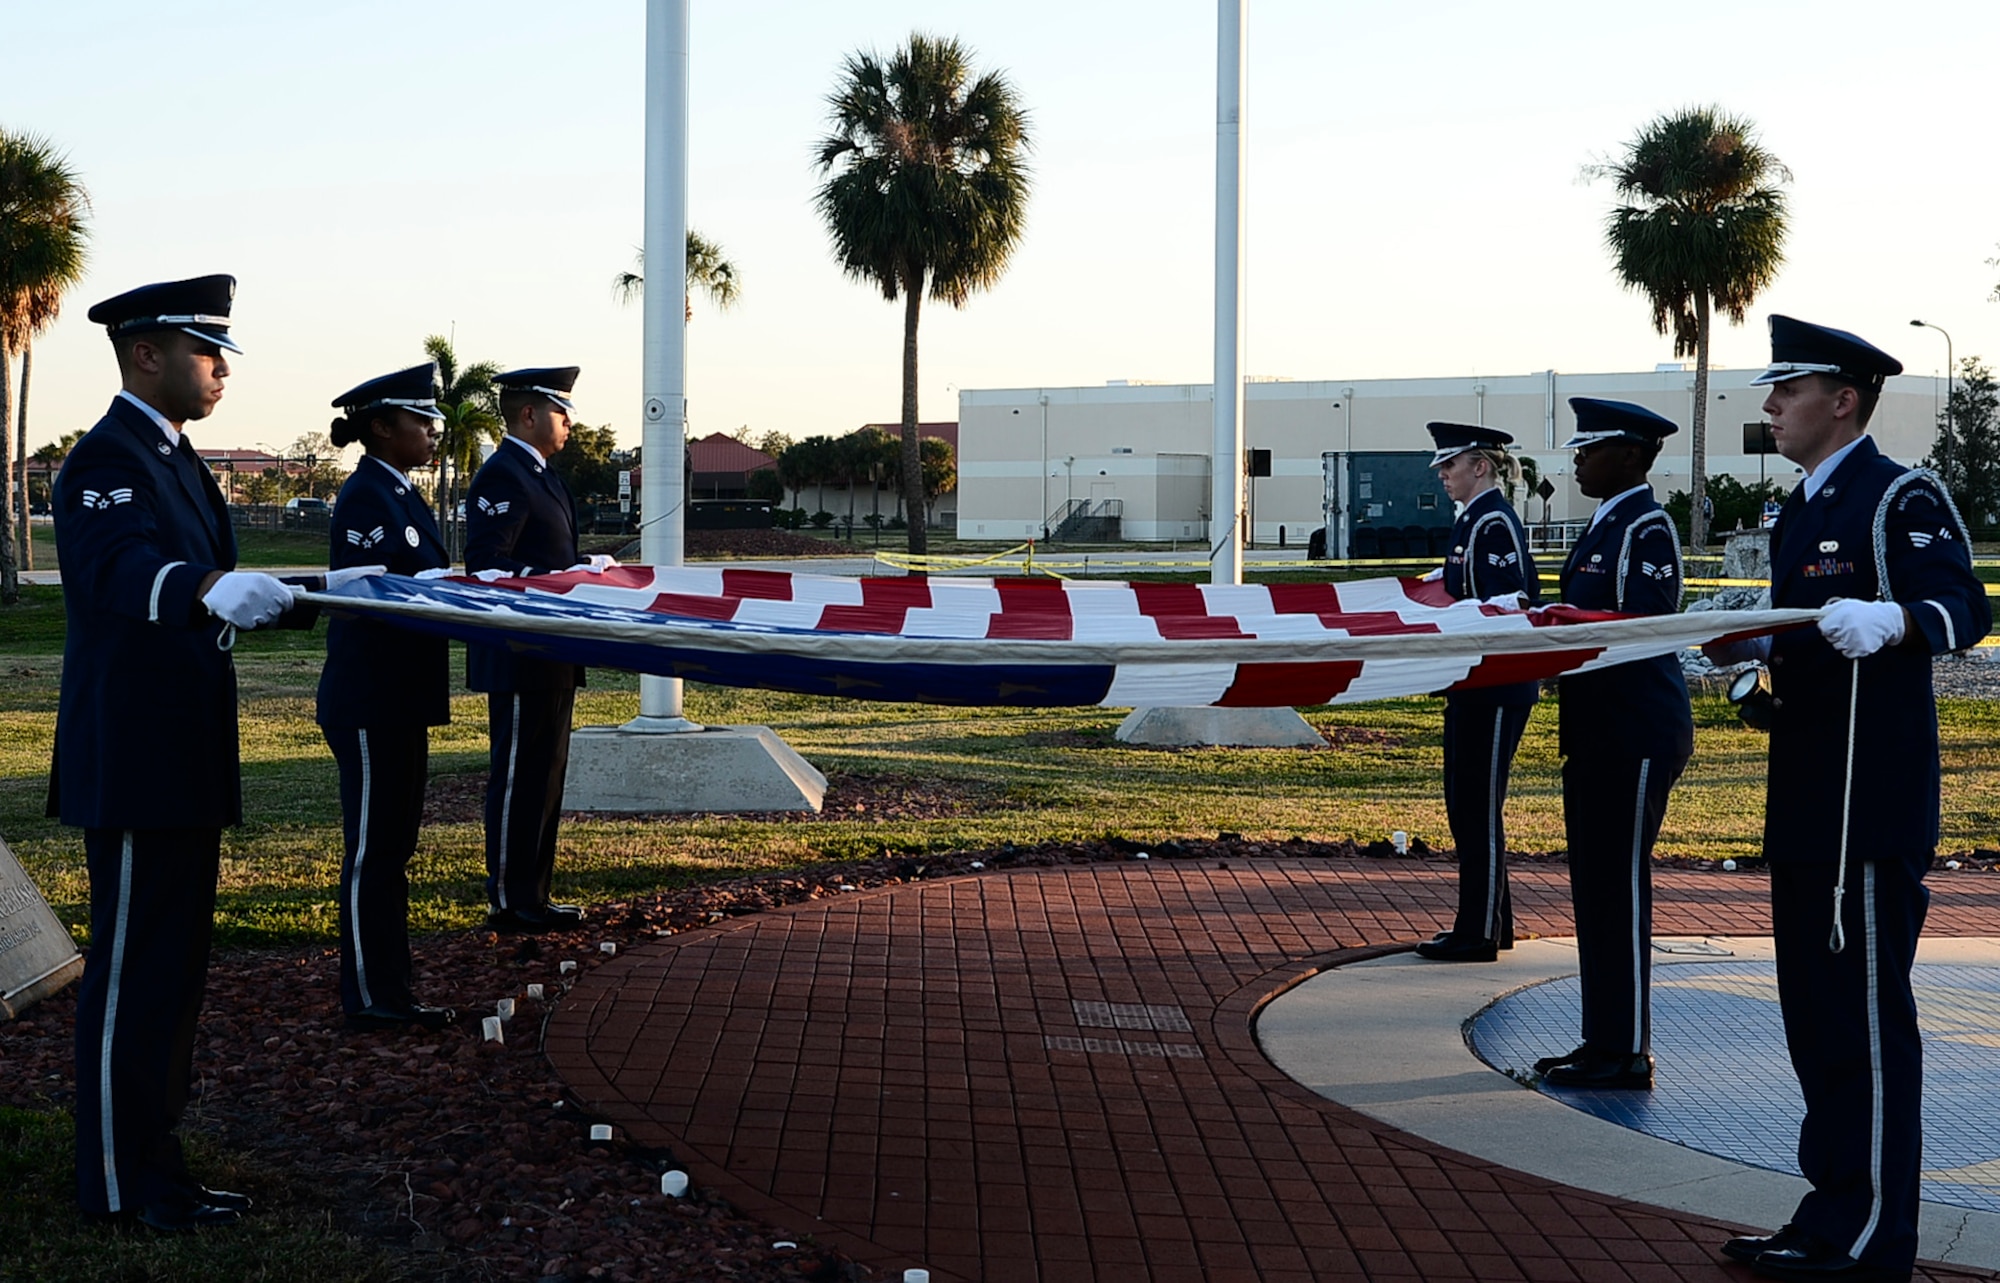 Members from MacDill Air Force Base, Fla., honor guard prepare to fold a flag during a Veterans Day Ceremony at MacDill Air Force Base, Fla., Nov. 10, 2016. Veterans Day is observed annually on November 11 to honor military veterans who have served in the U.S. Armed Forces. (U.S. Air Force photo by Senior Airman Tori Schulz)